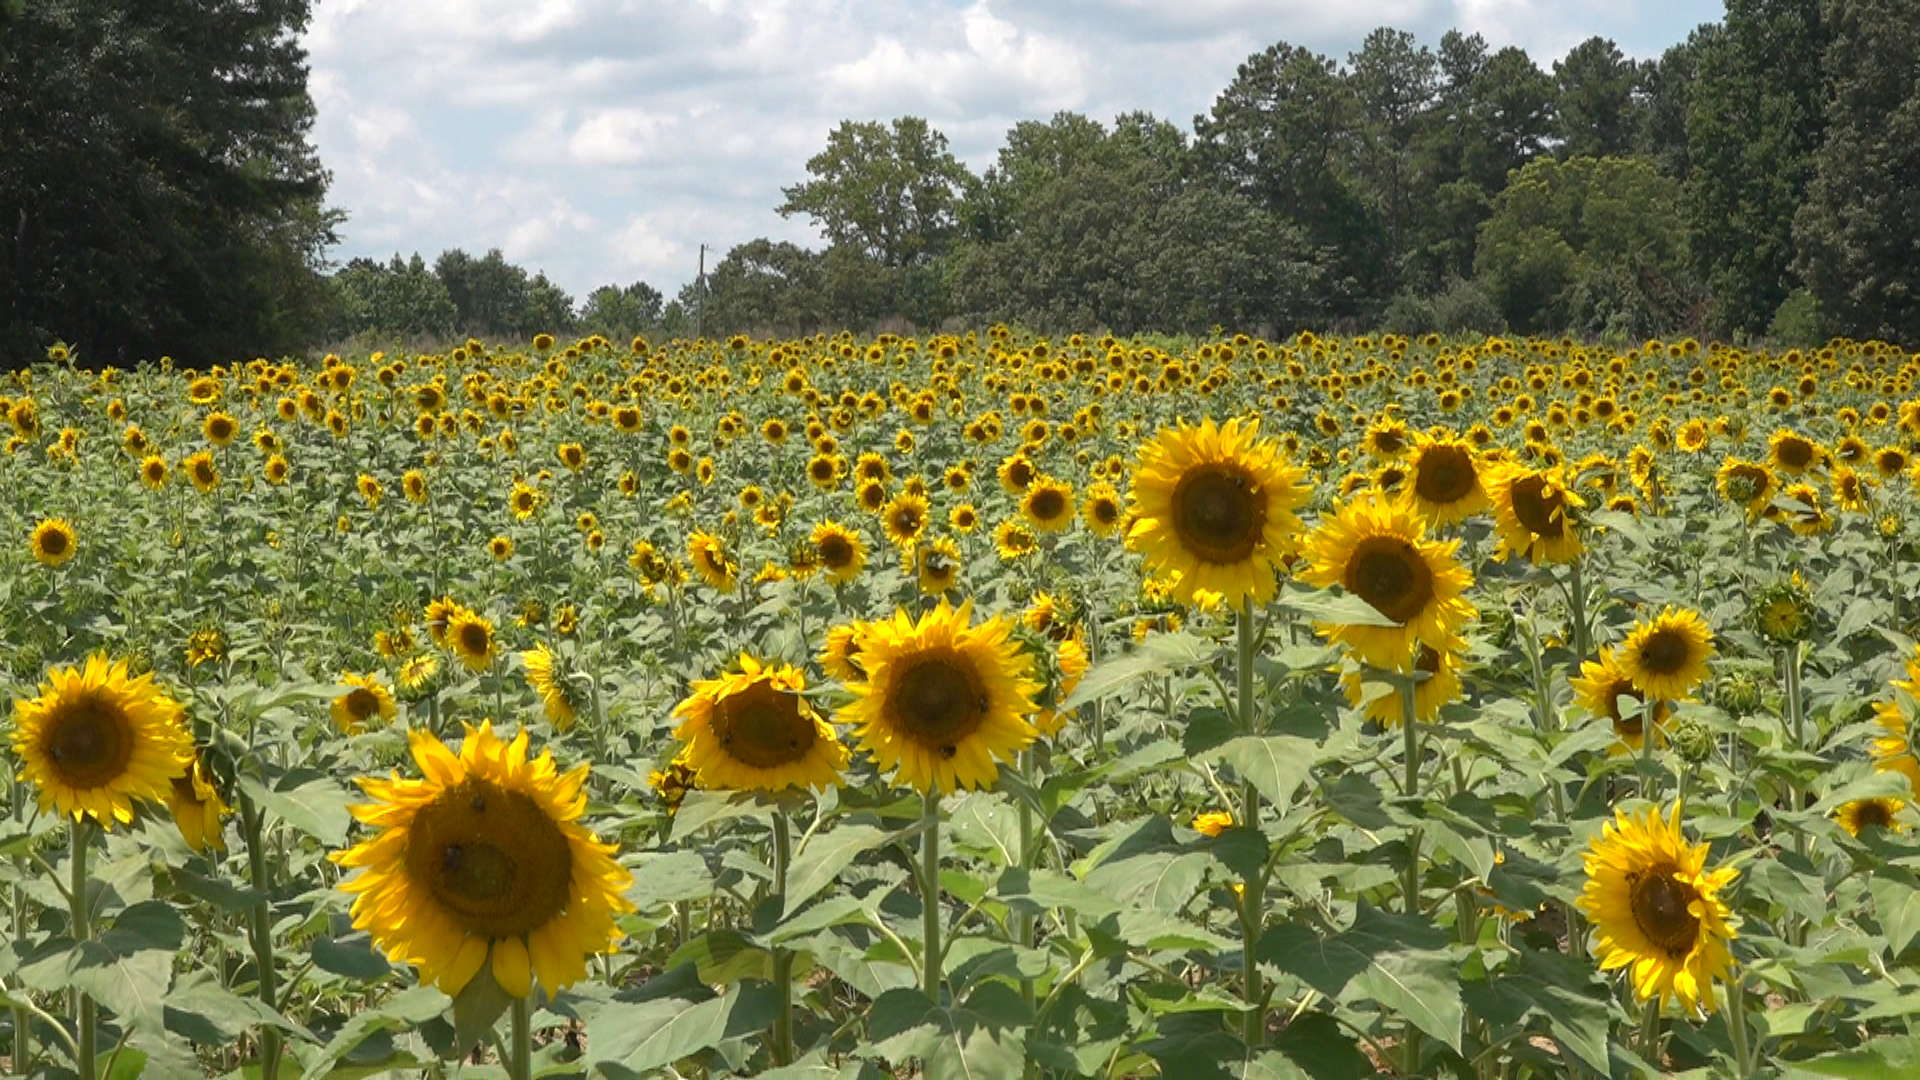 For a limited time only, extra large sunflowers can be handpicked and purchased in Cumming.